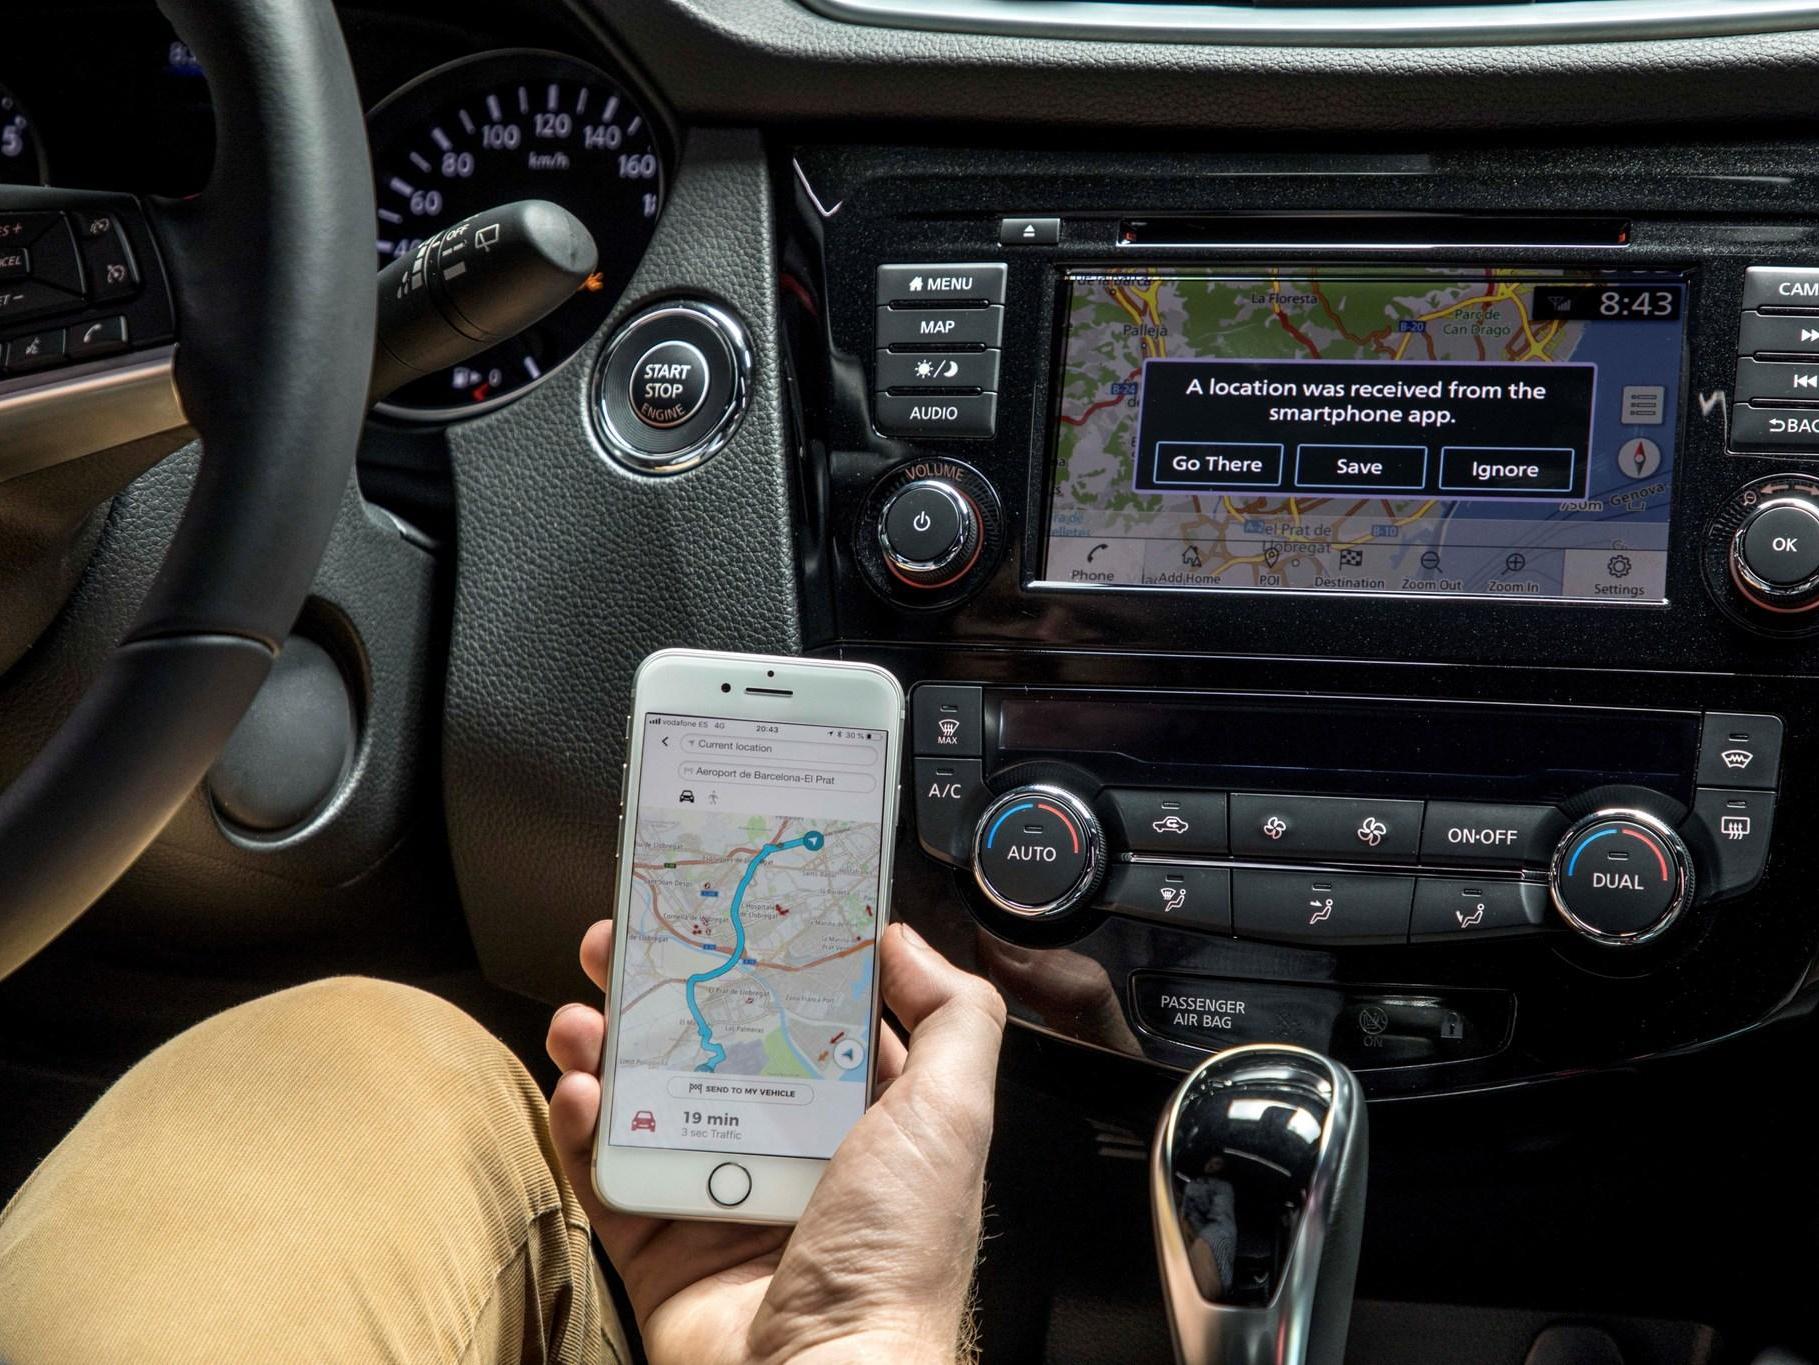 Many smartphones allow motorists to track the location of their car from an app